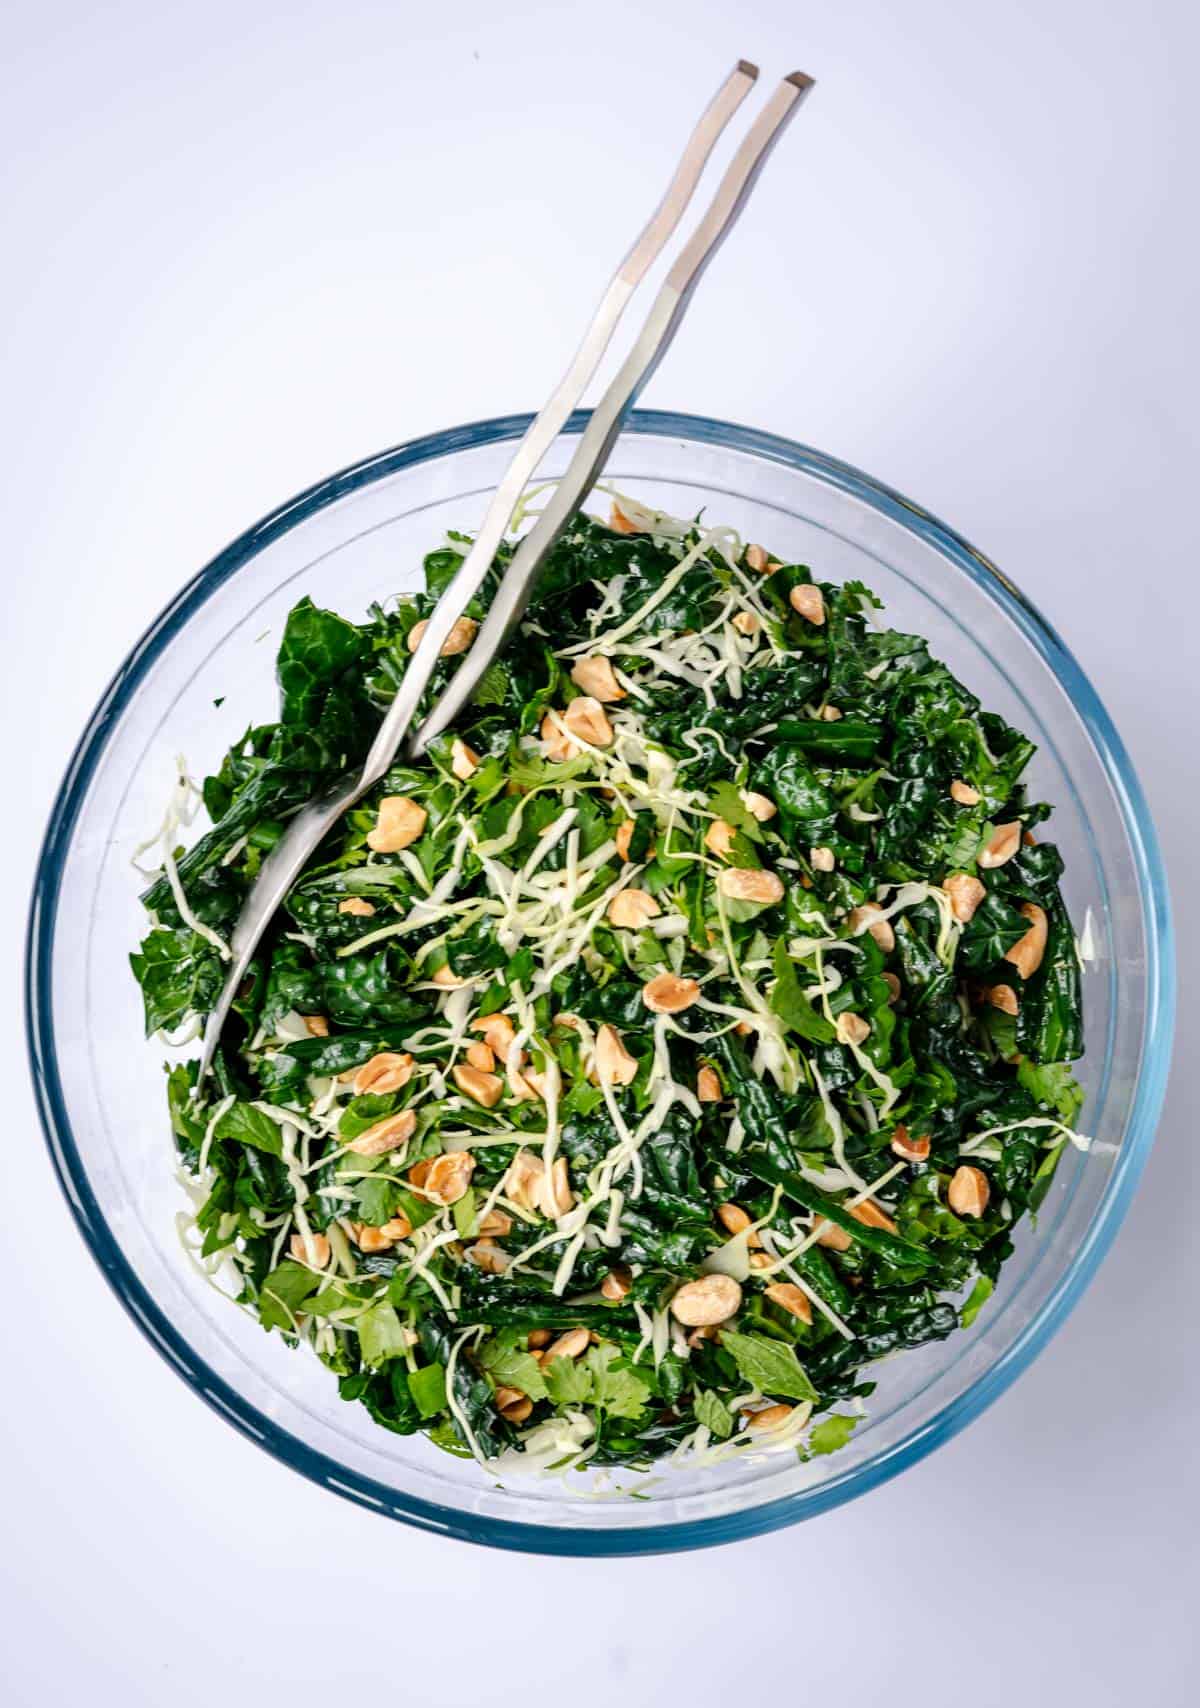 crunchy kale salad with spicy peanut vinaigrette in a bowl with tongs to serve